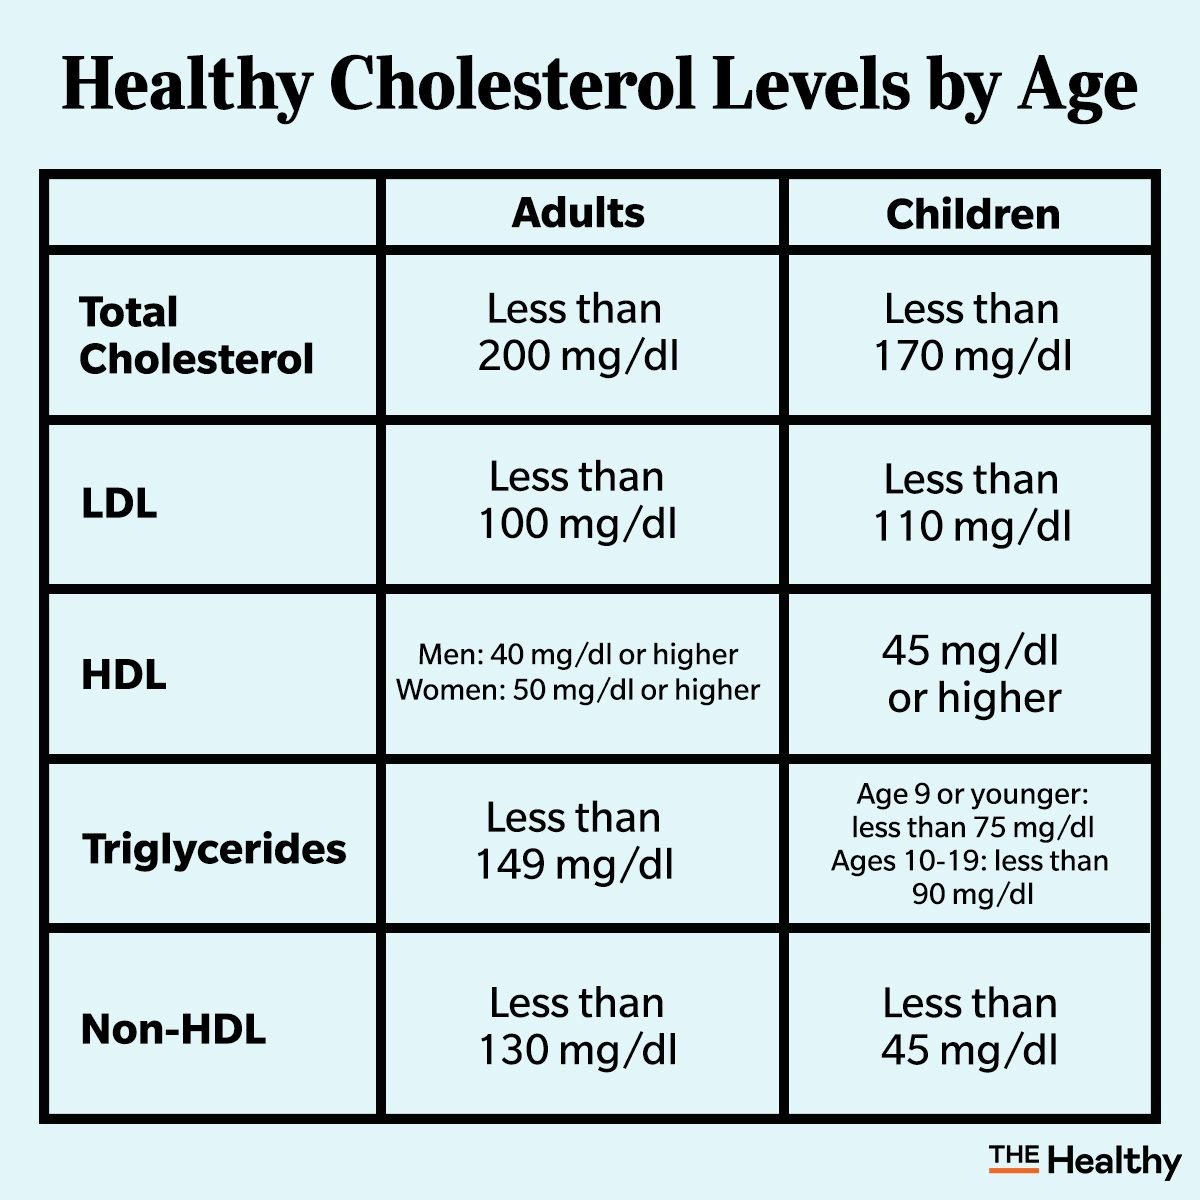 Cholesterol level guidelines